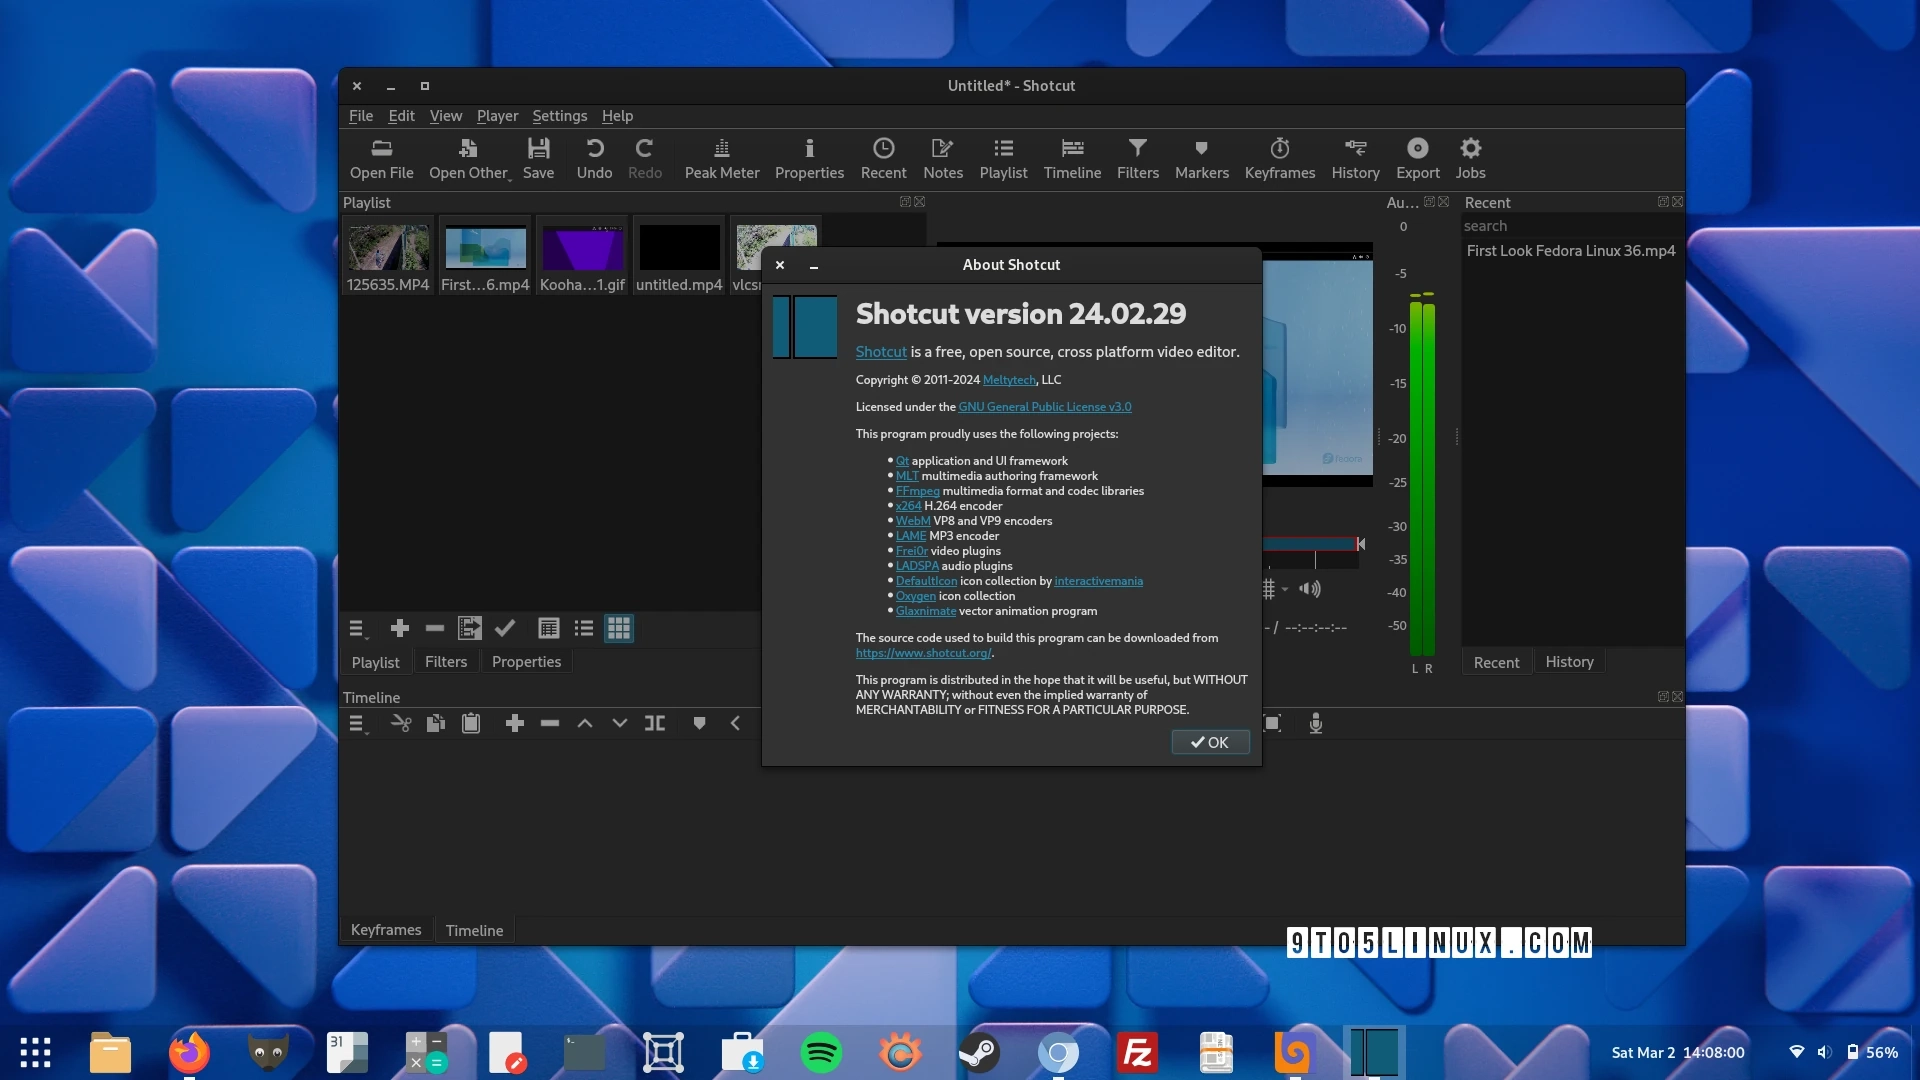 Introducing Shotcut 24.02: The Latest Release of Open-Source Video Editor with Ambisonic Audio Support